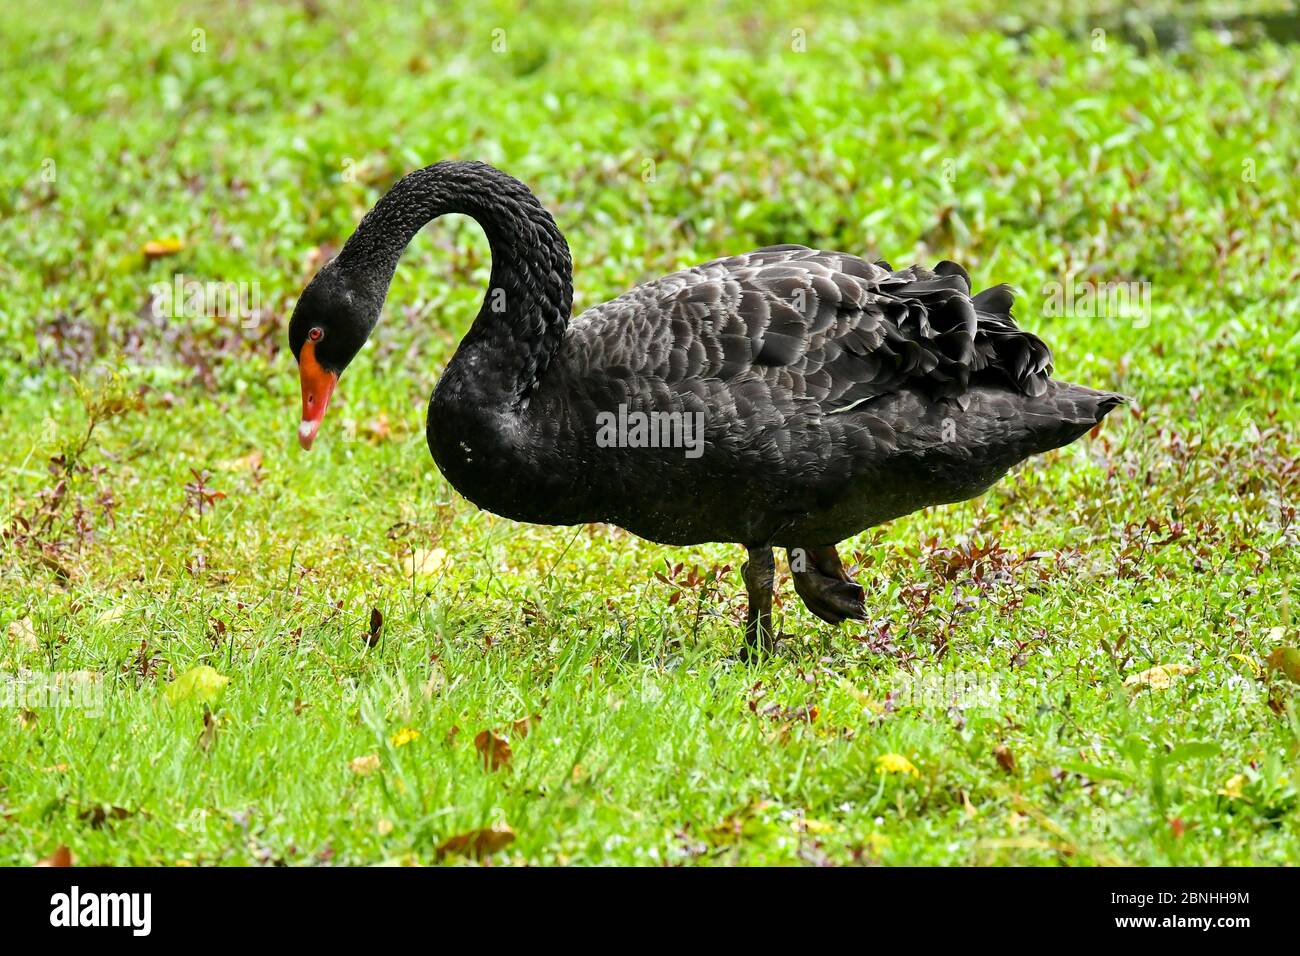 Swan and cygnet swimming on pond Stock Photo